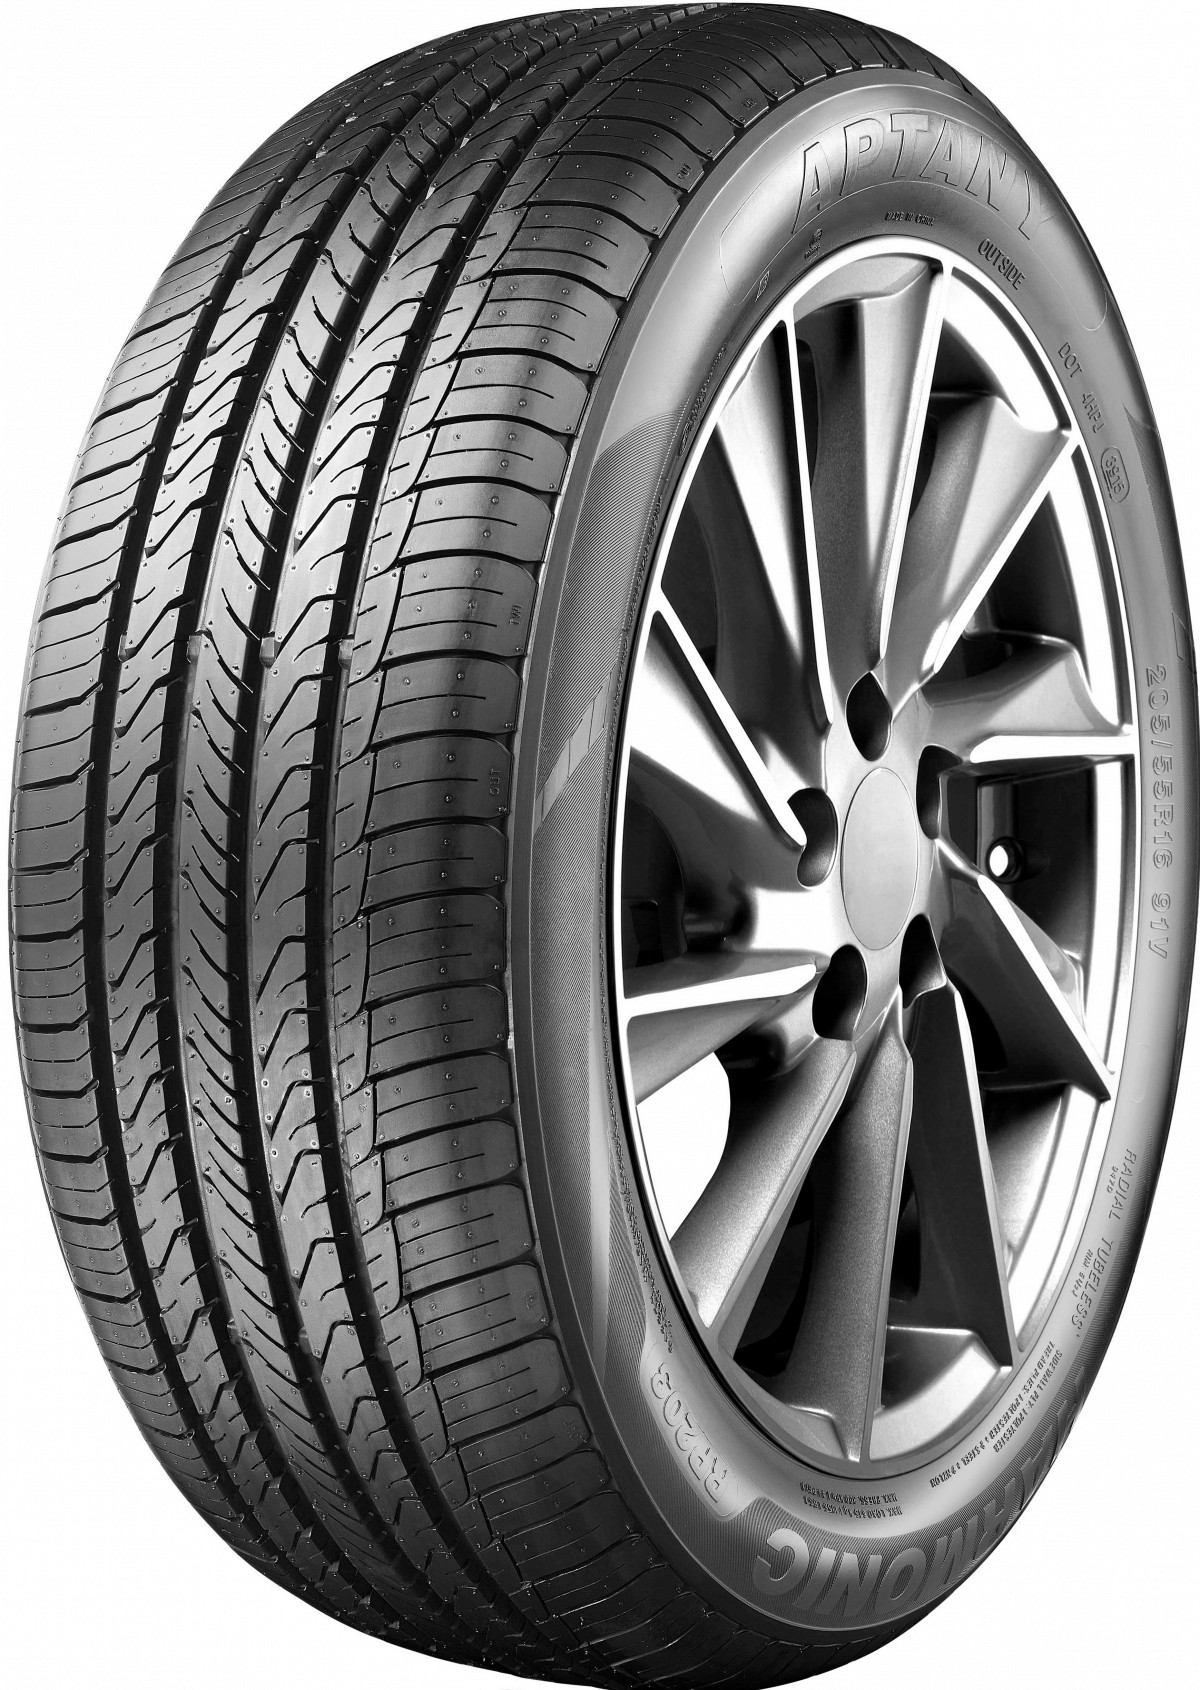 Gomme per autovetture BMW 215 65 R16 Aptany RP203 6986